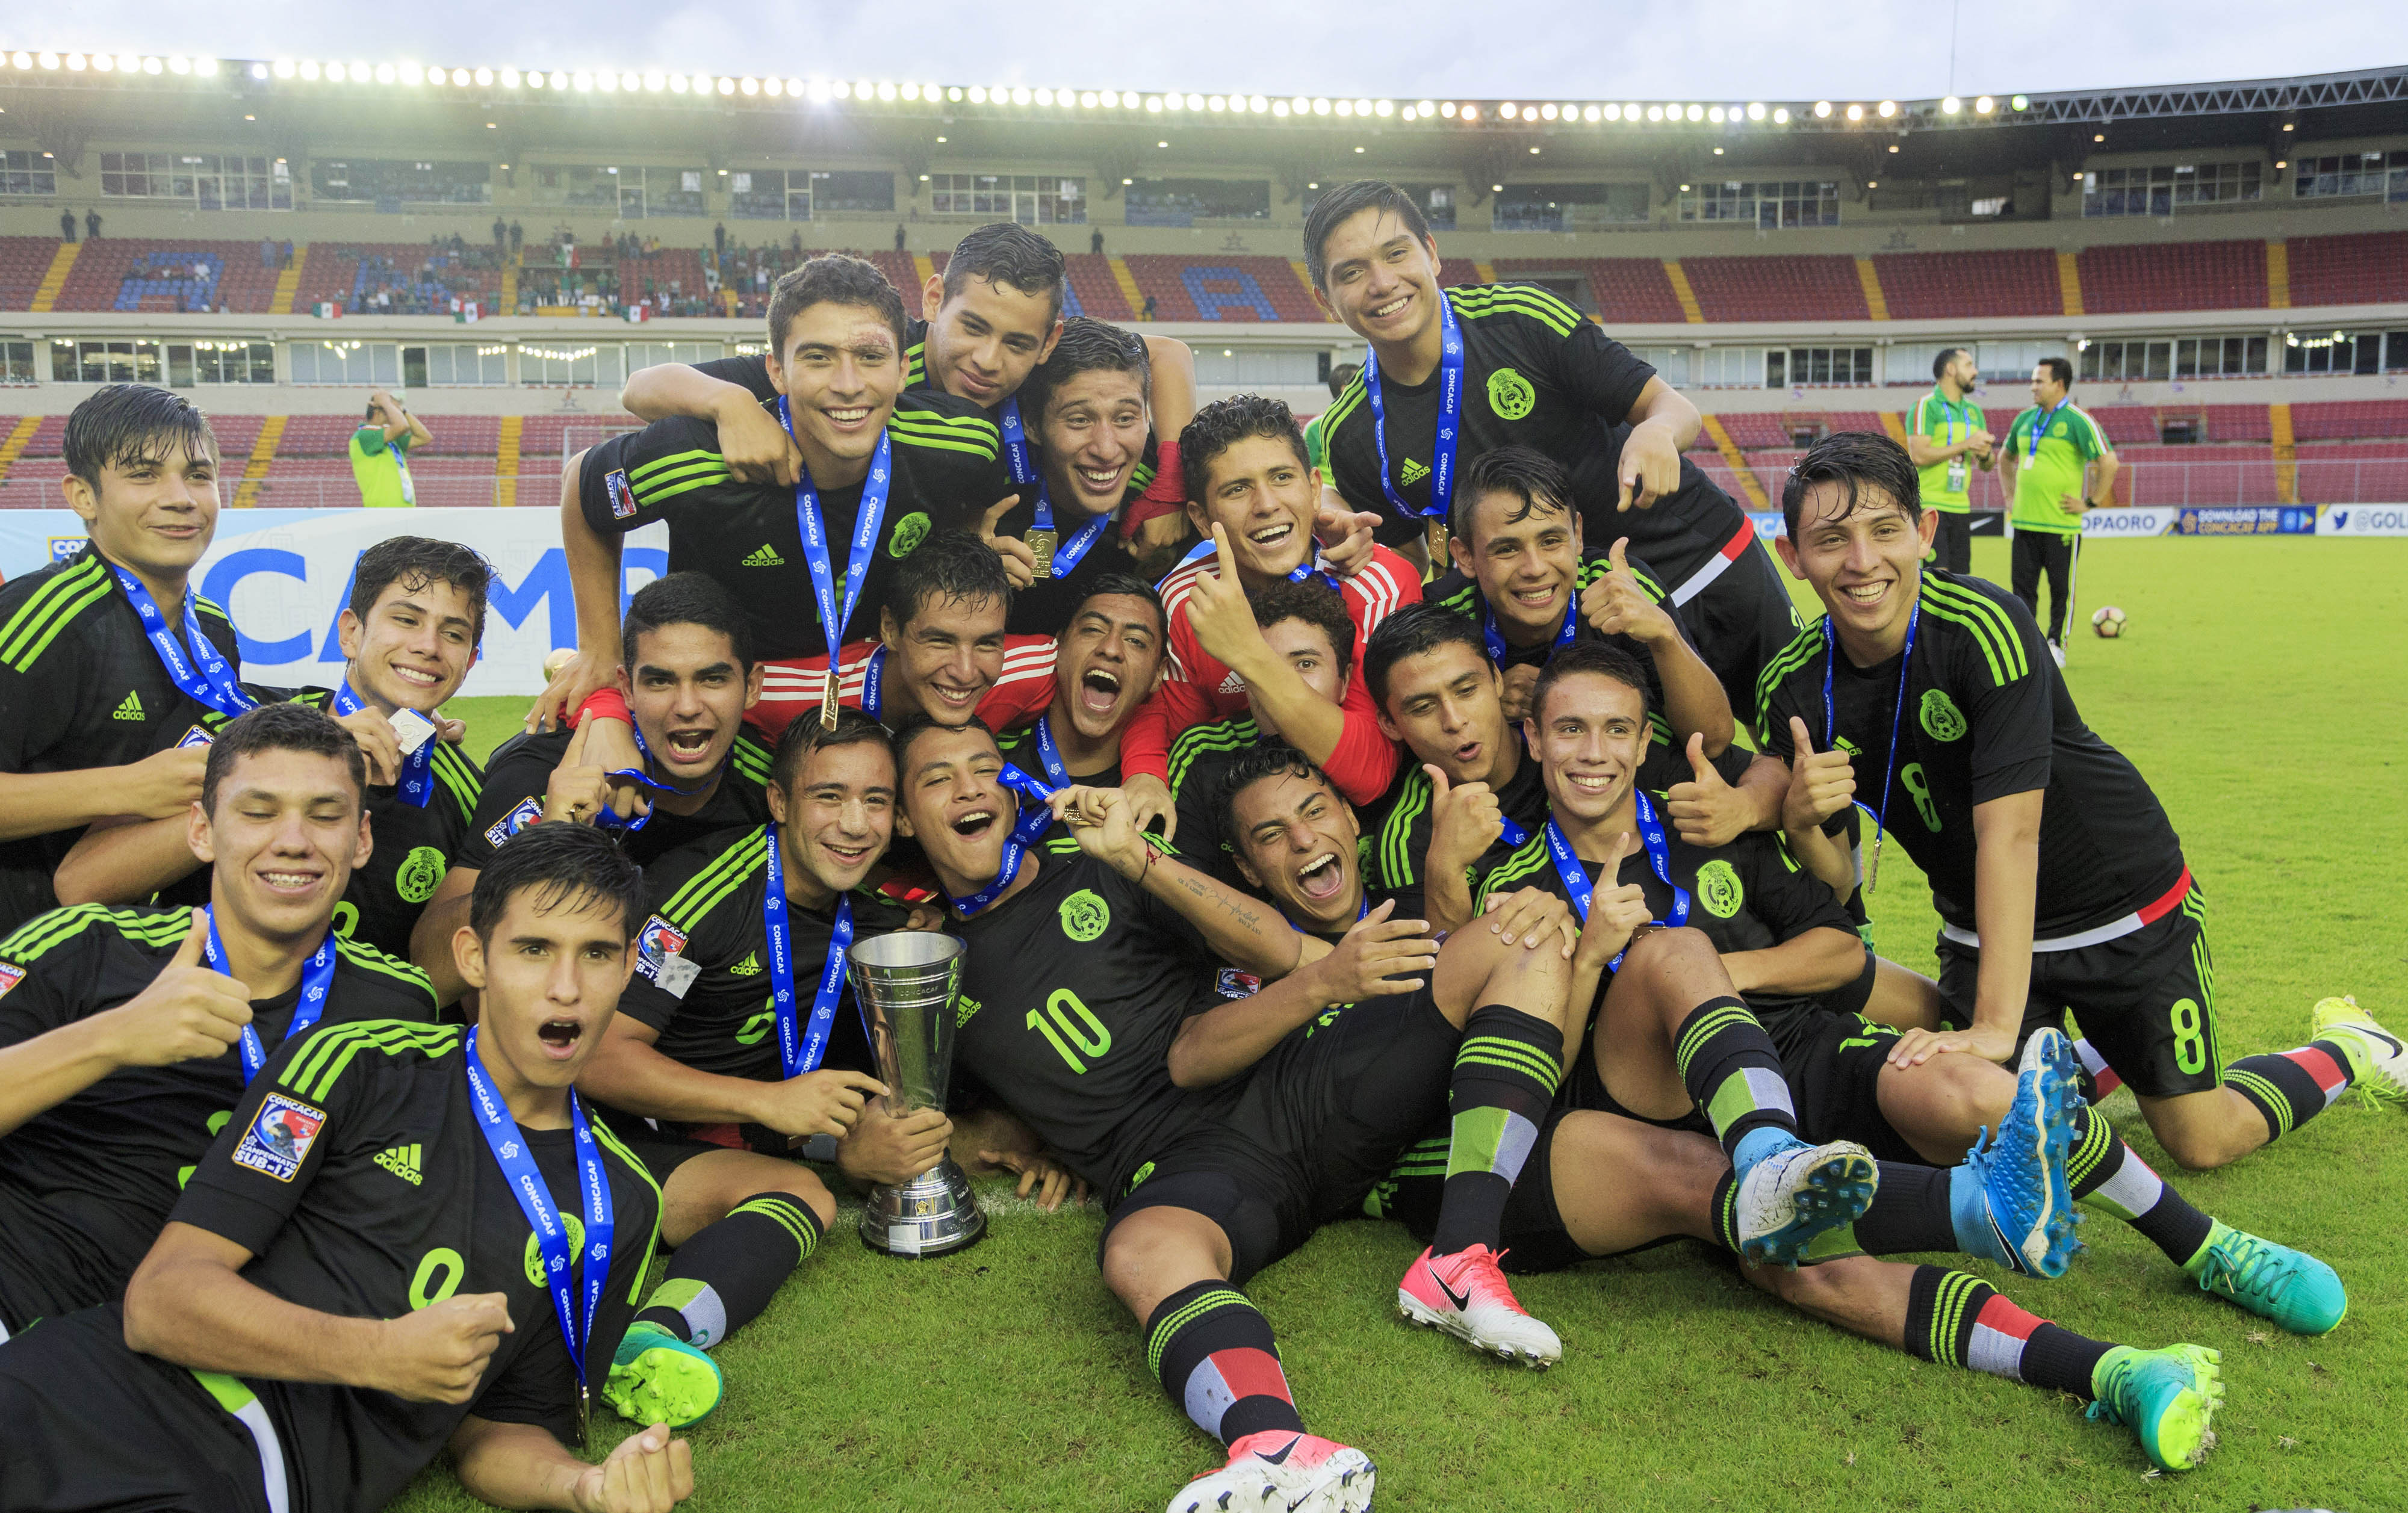 Venue and Dates Confirmed for the 2019 Concacaf Under17 Championship